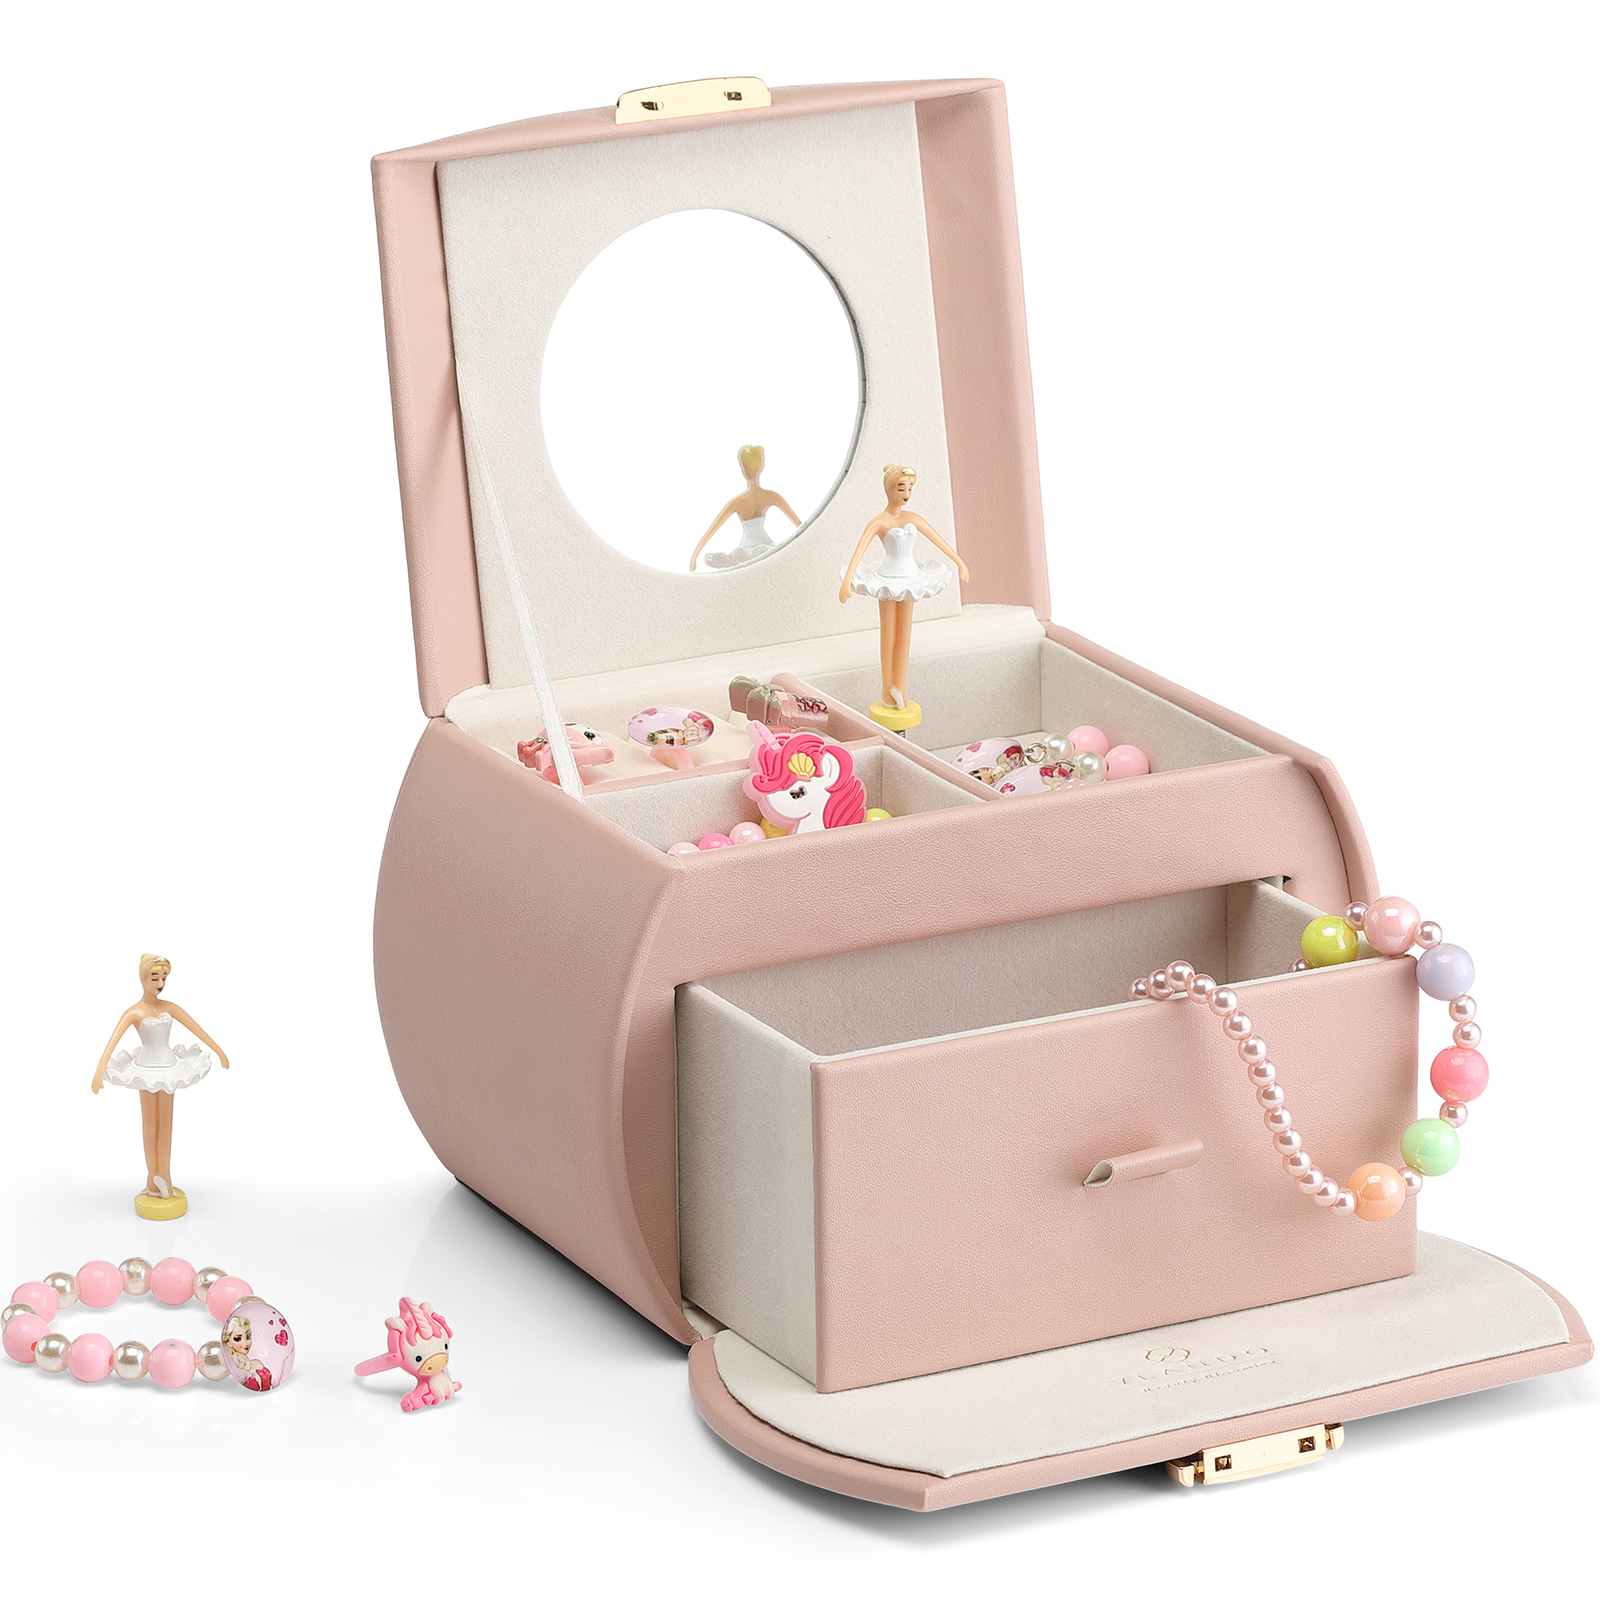 The Dancing Ballerina, a Musical Jewelry Box for Black or Brown Girls –  Best Dolls For Kids